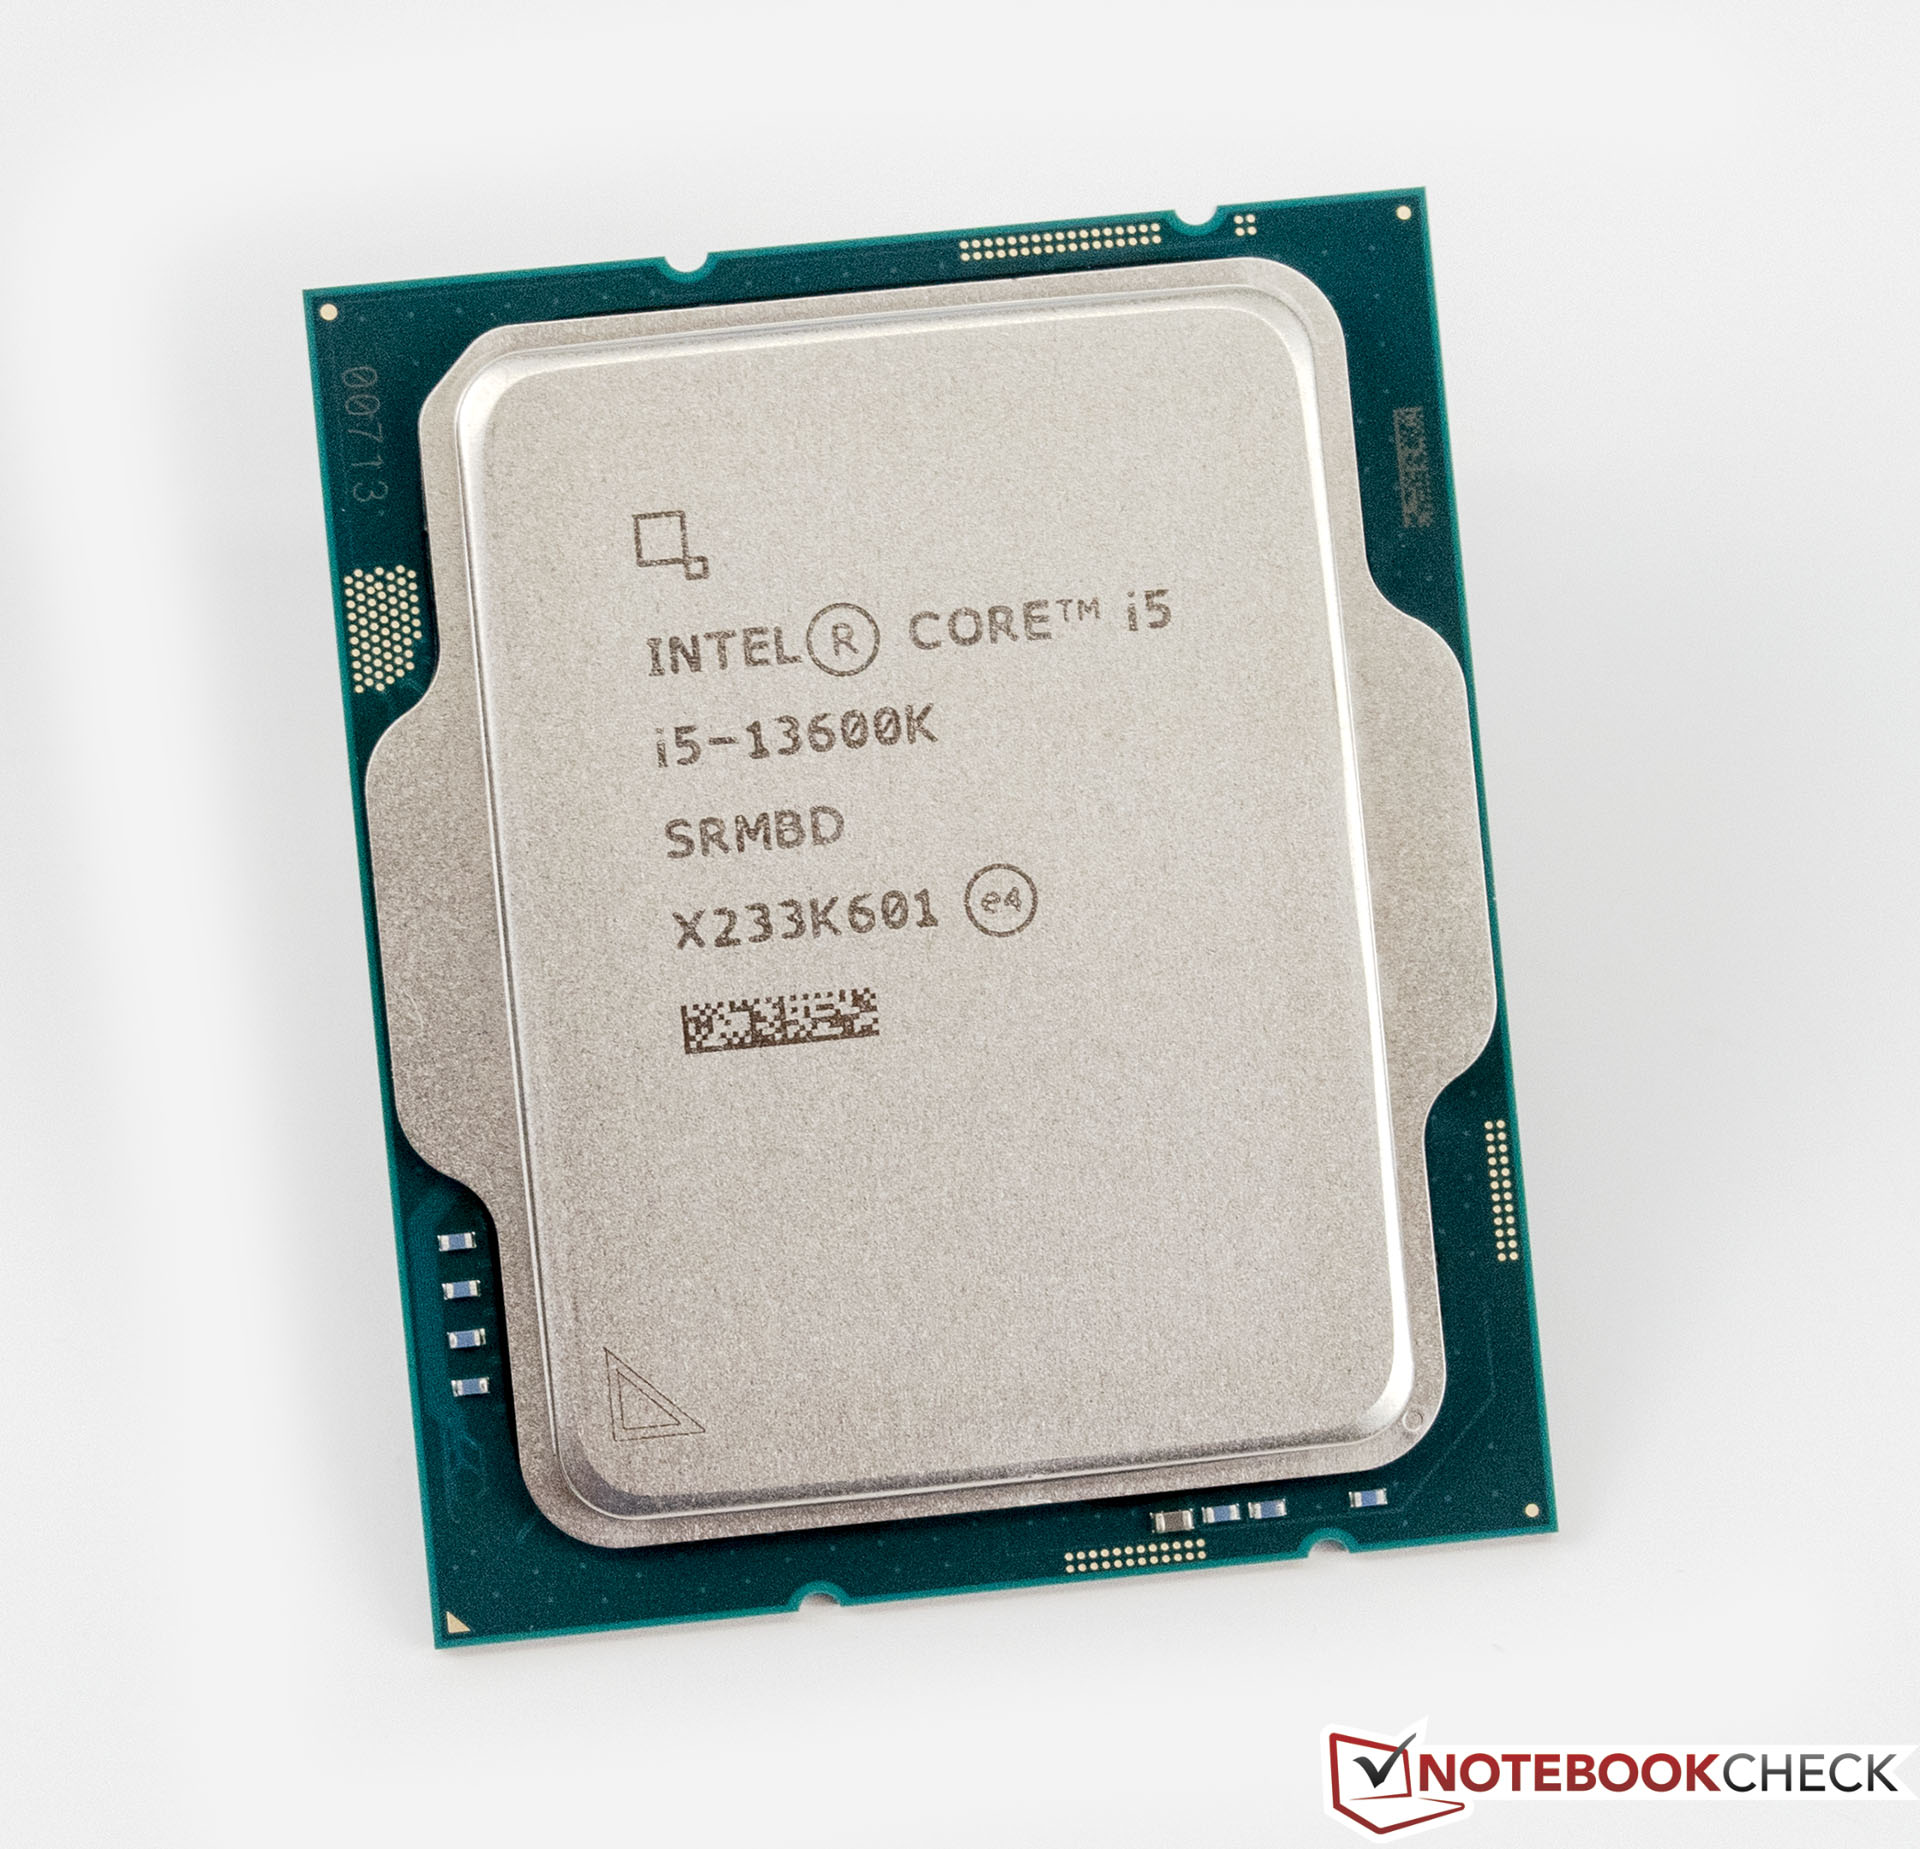 Intel Core i5-13600K Processor - Benchmarks and Specs